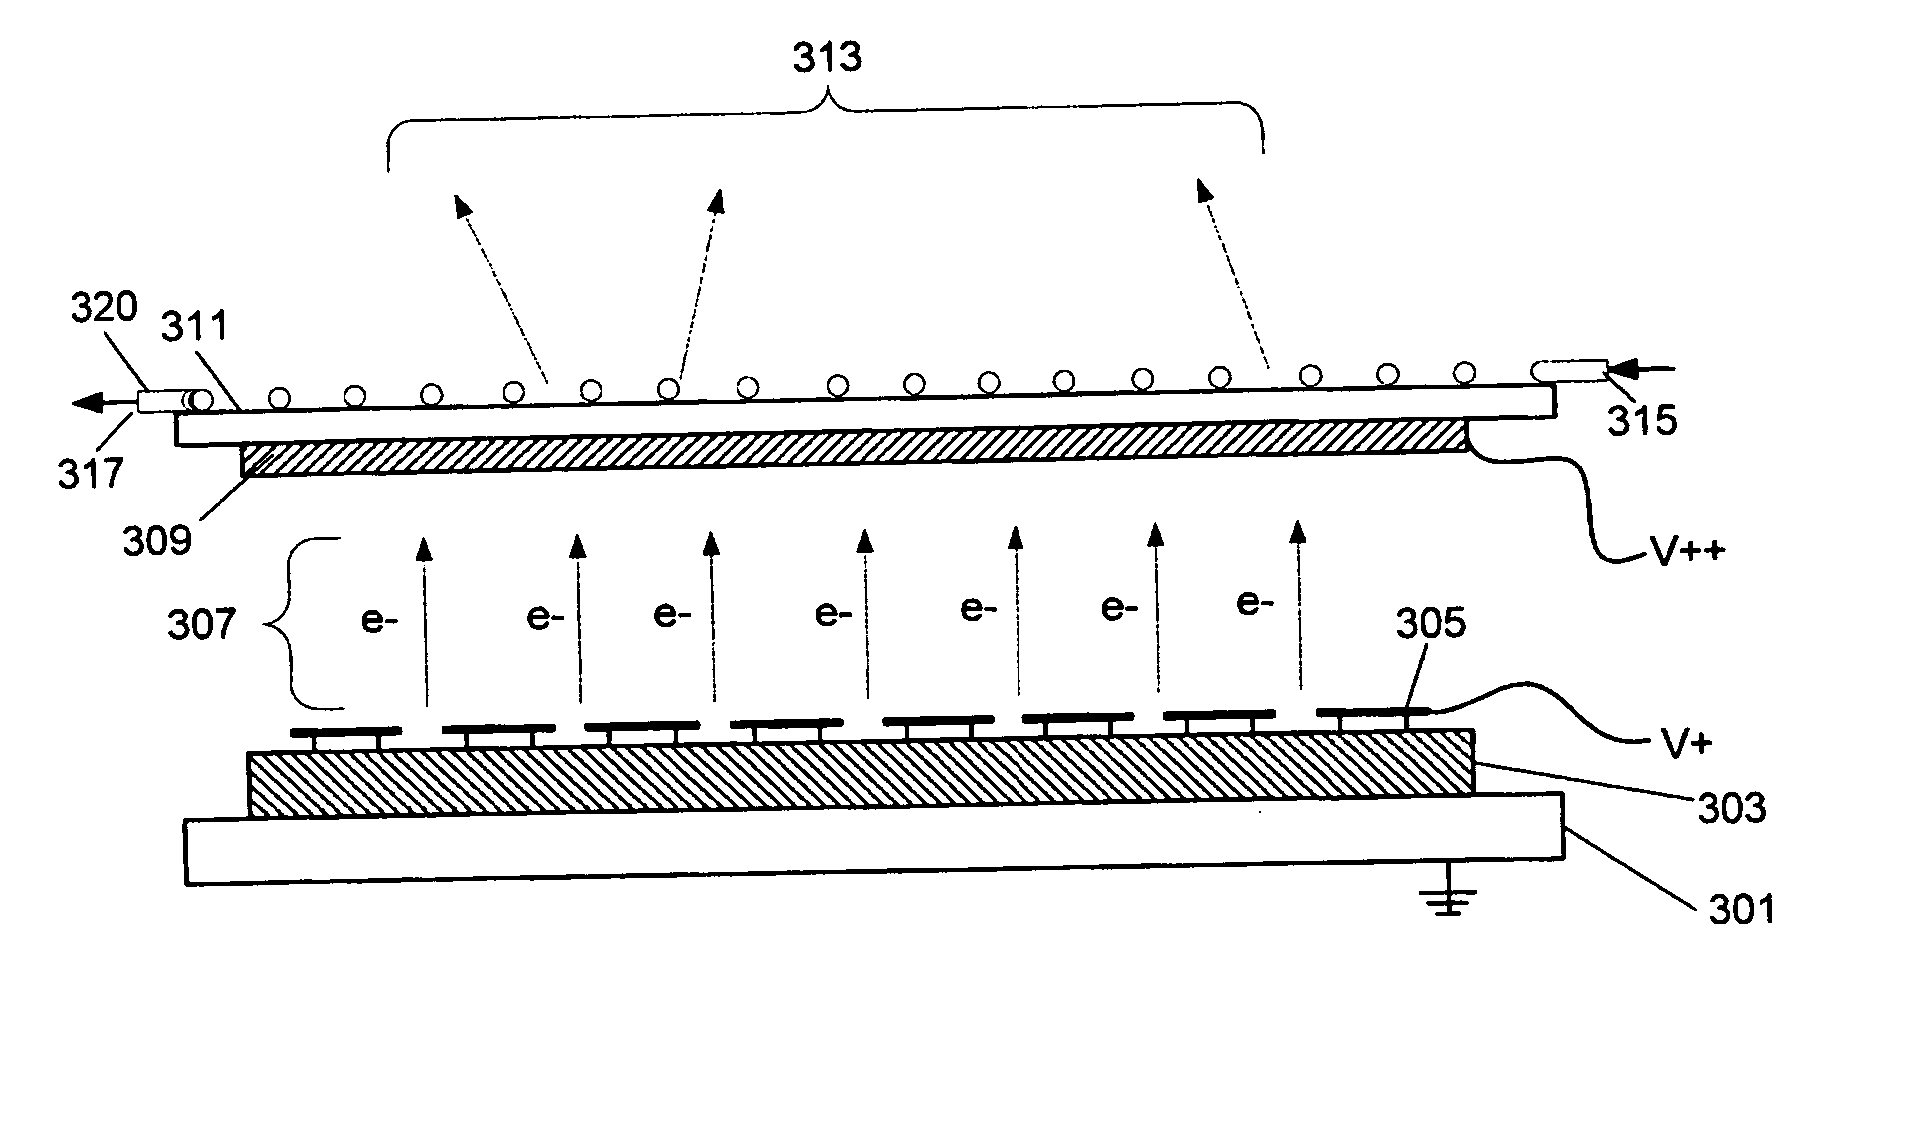 Decontamination and sterilization system using large area x-ray source